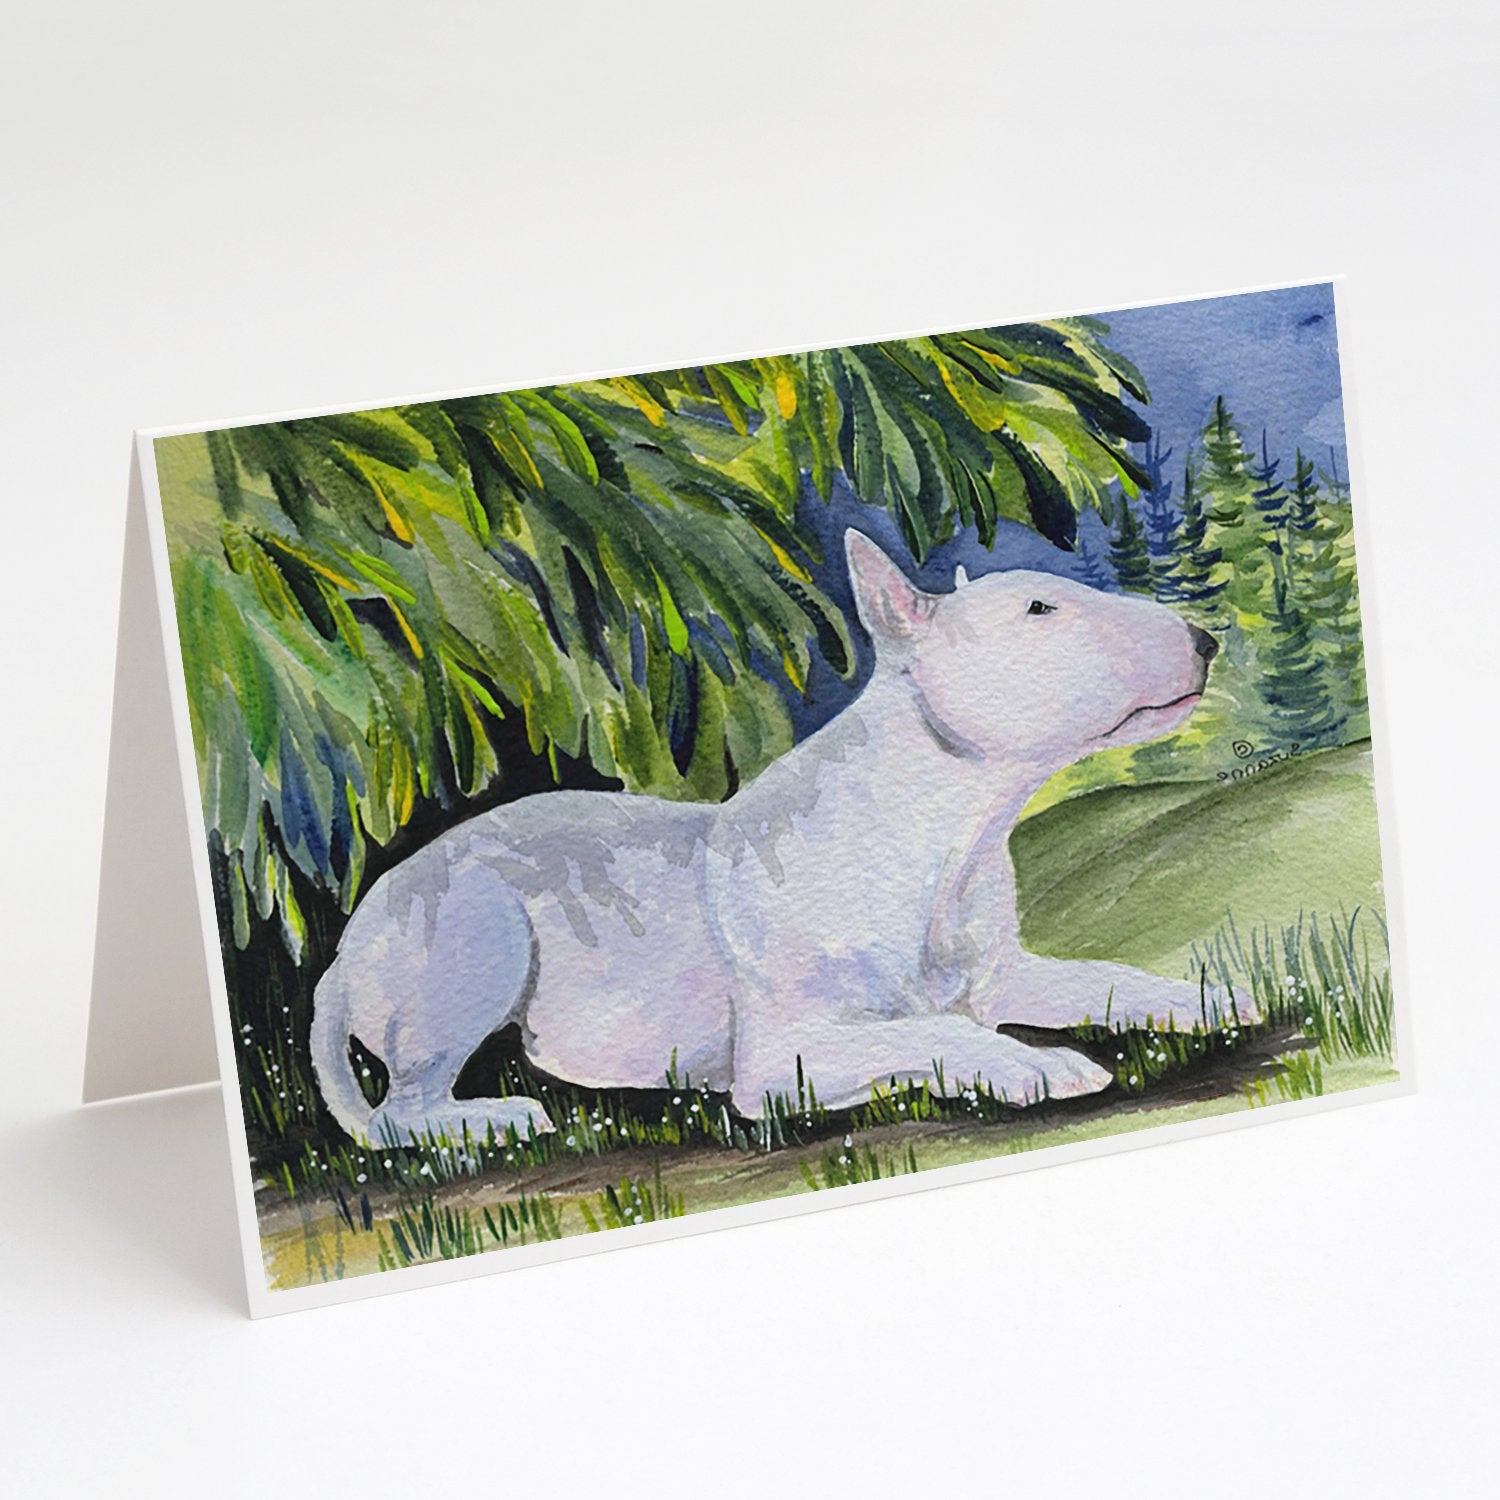 Buy this Bull Terrier Greeting Cards and Envelopes Pack of 8